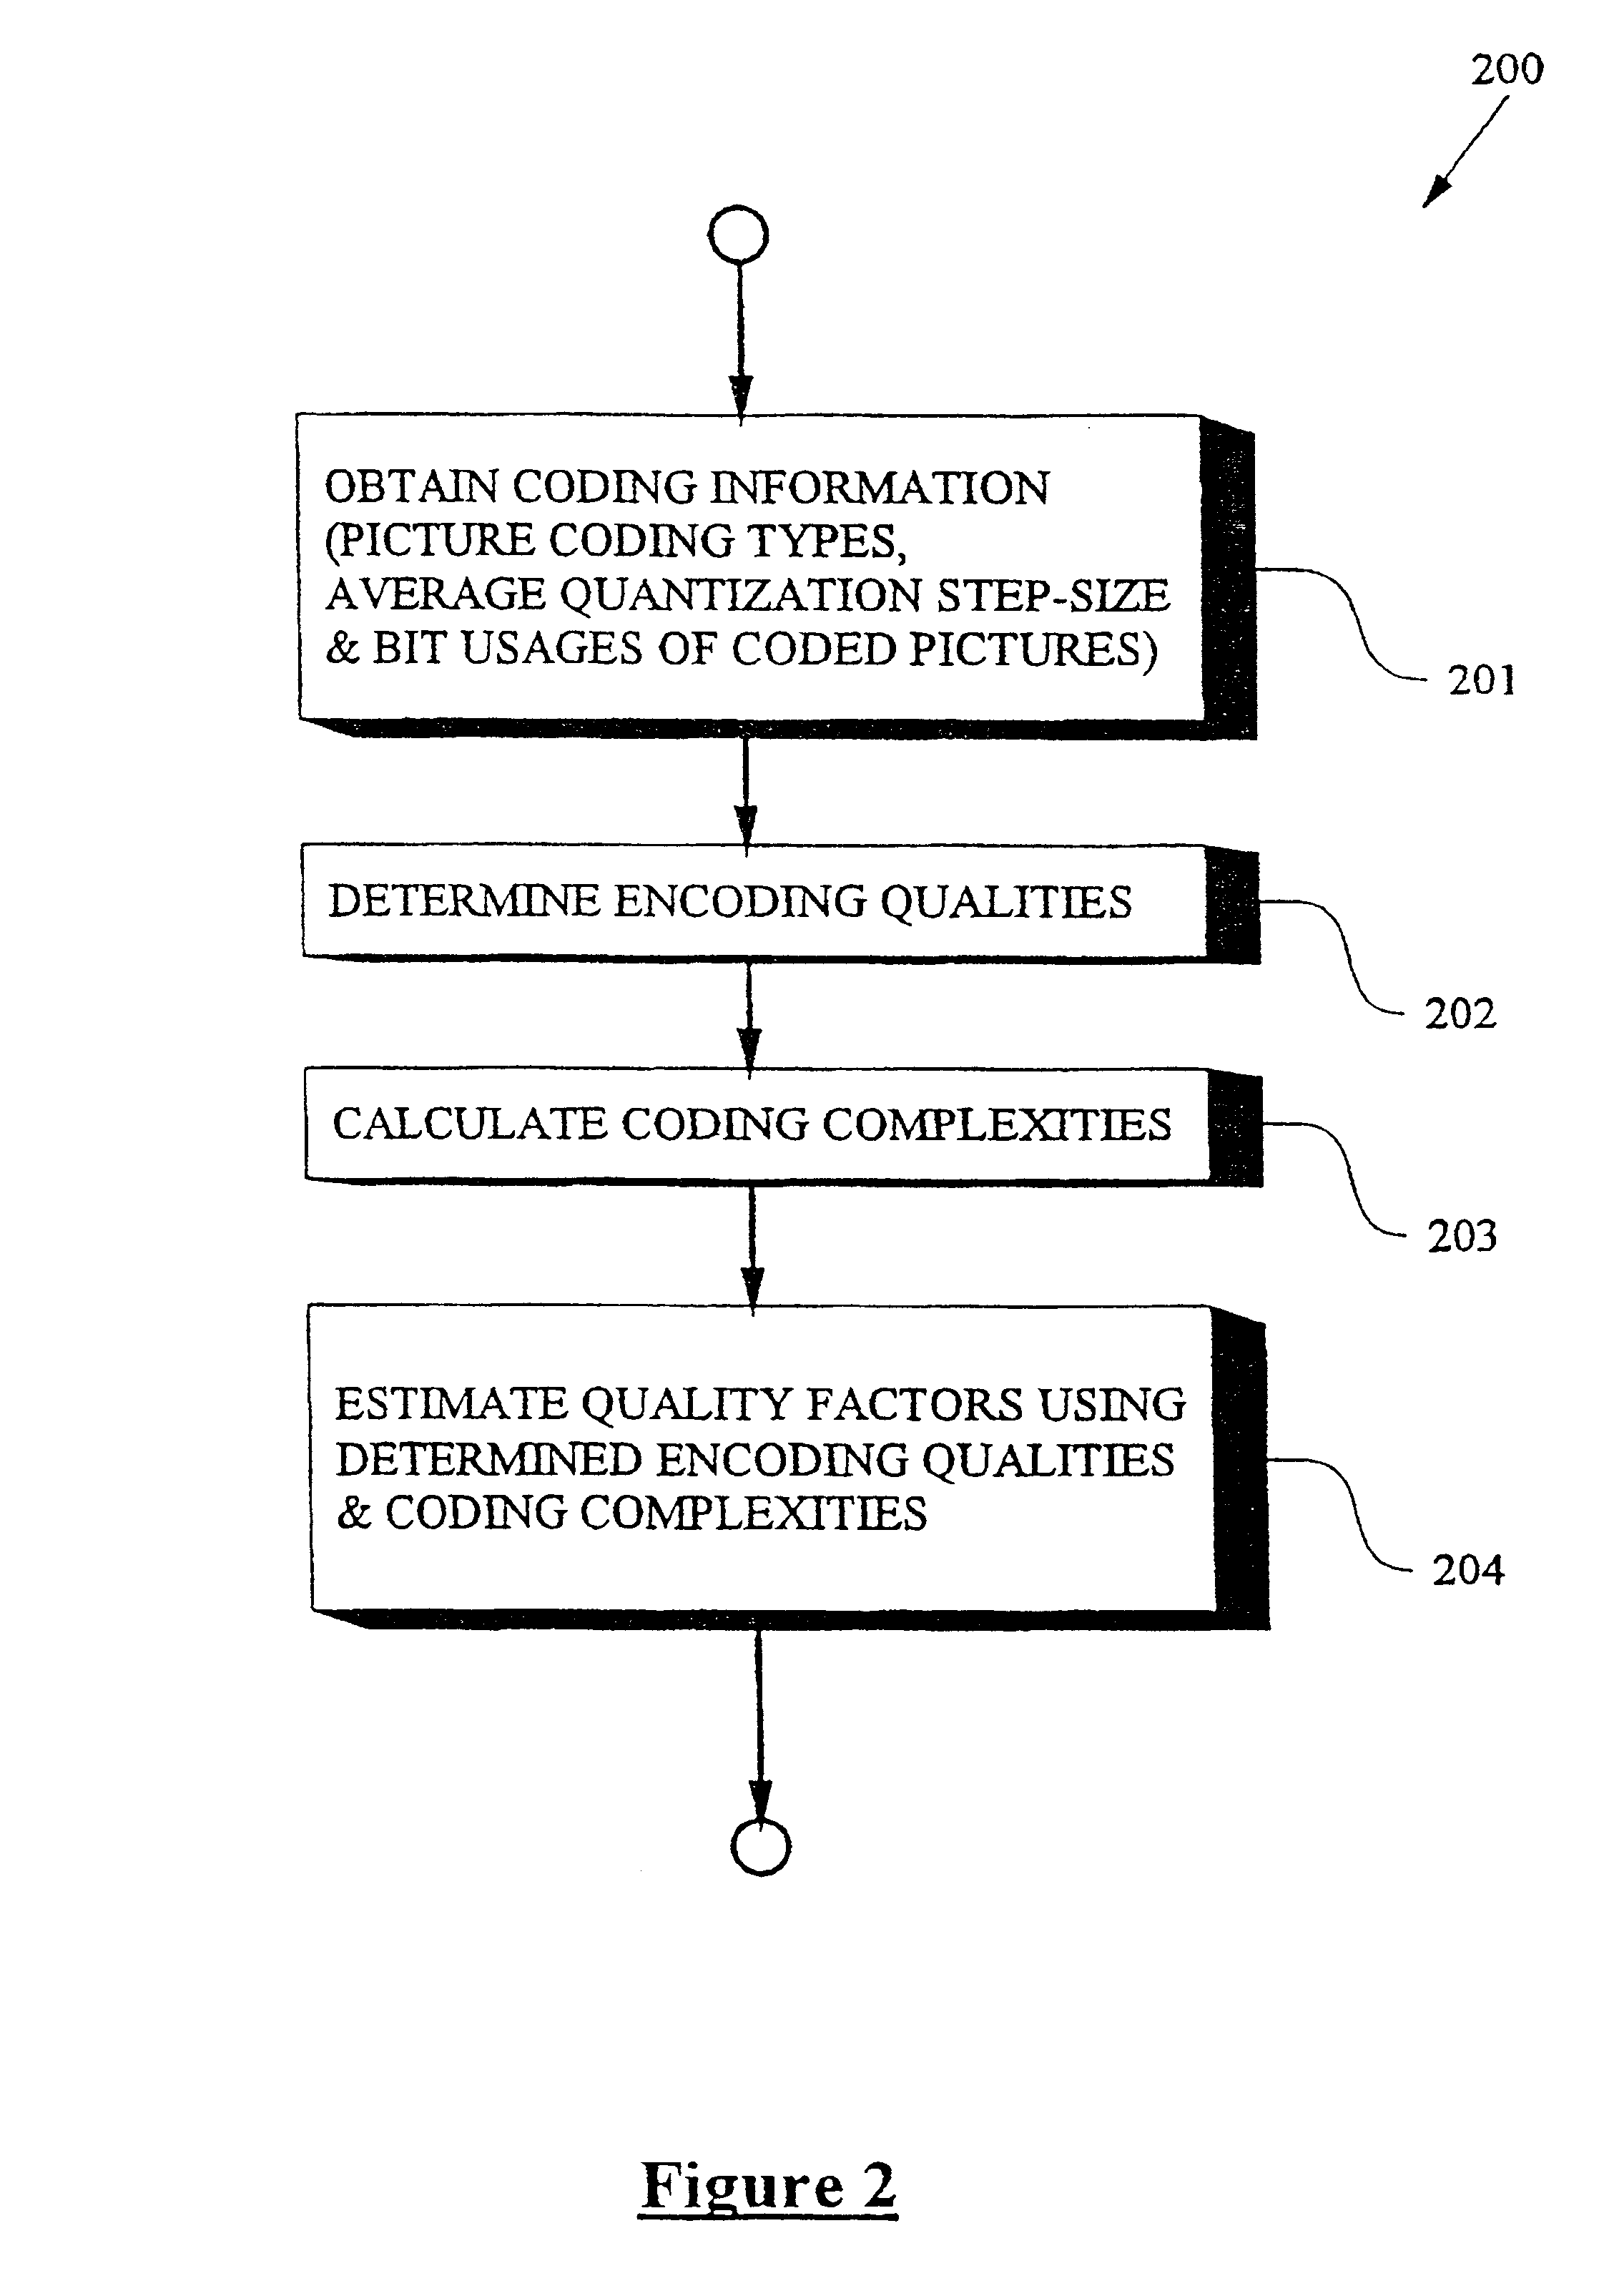 Sequence adaptive bit allocation for pictures encoding